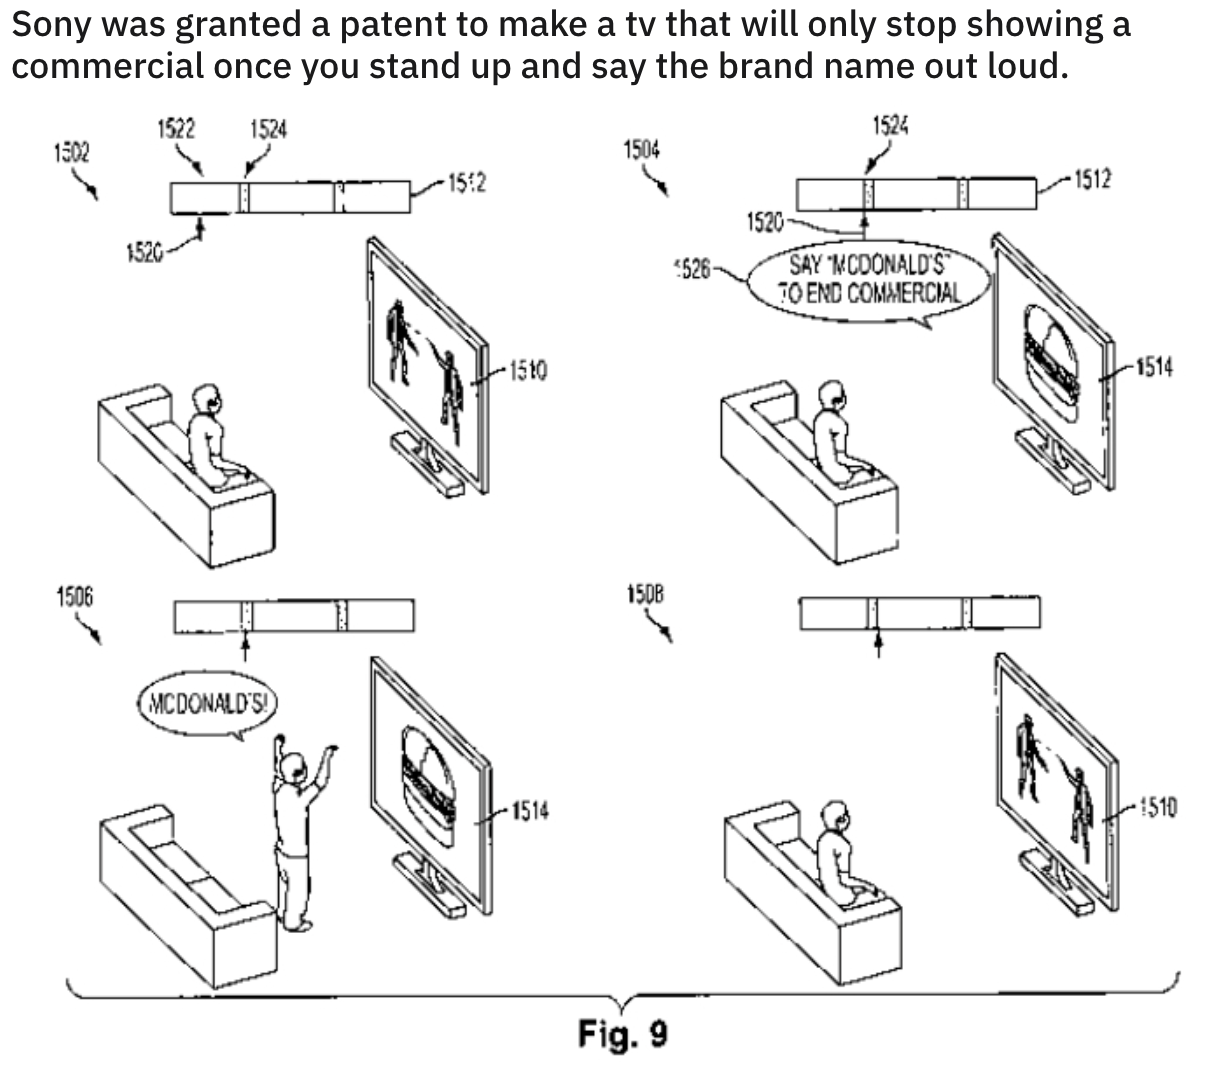 funny design fails - drawing - Sony was granted a patent to make a tv that will only stop showing a commercial once you stand up and say the brand name out loud. 1522 1524 1524 1502 1504 1512 1526 526 1520 Say